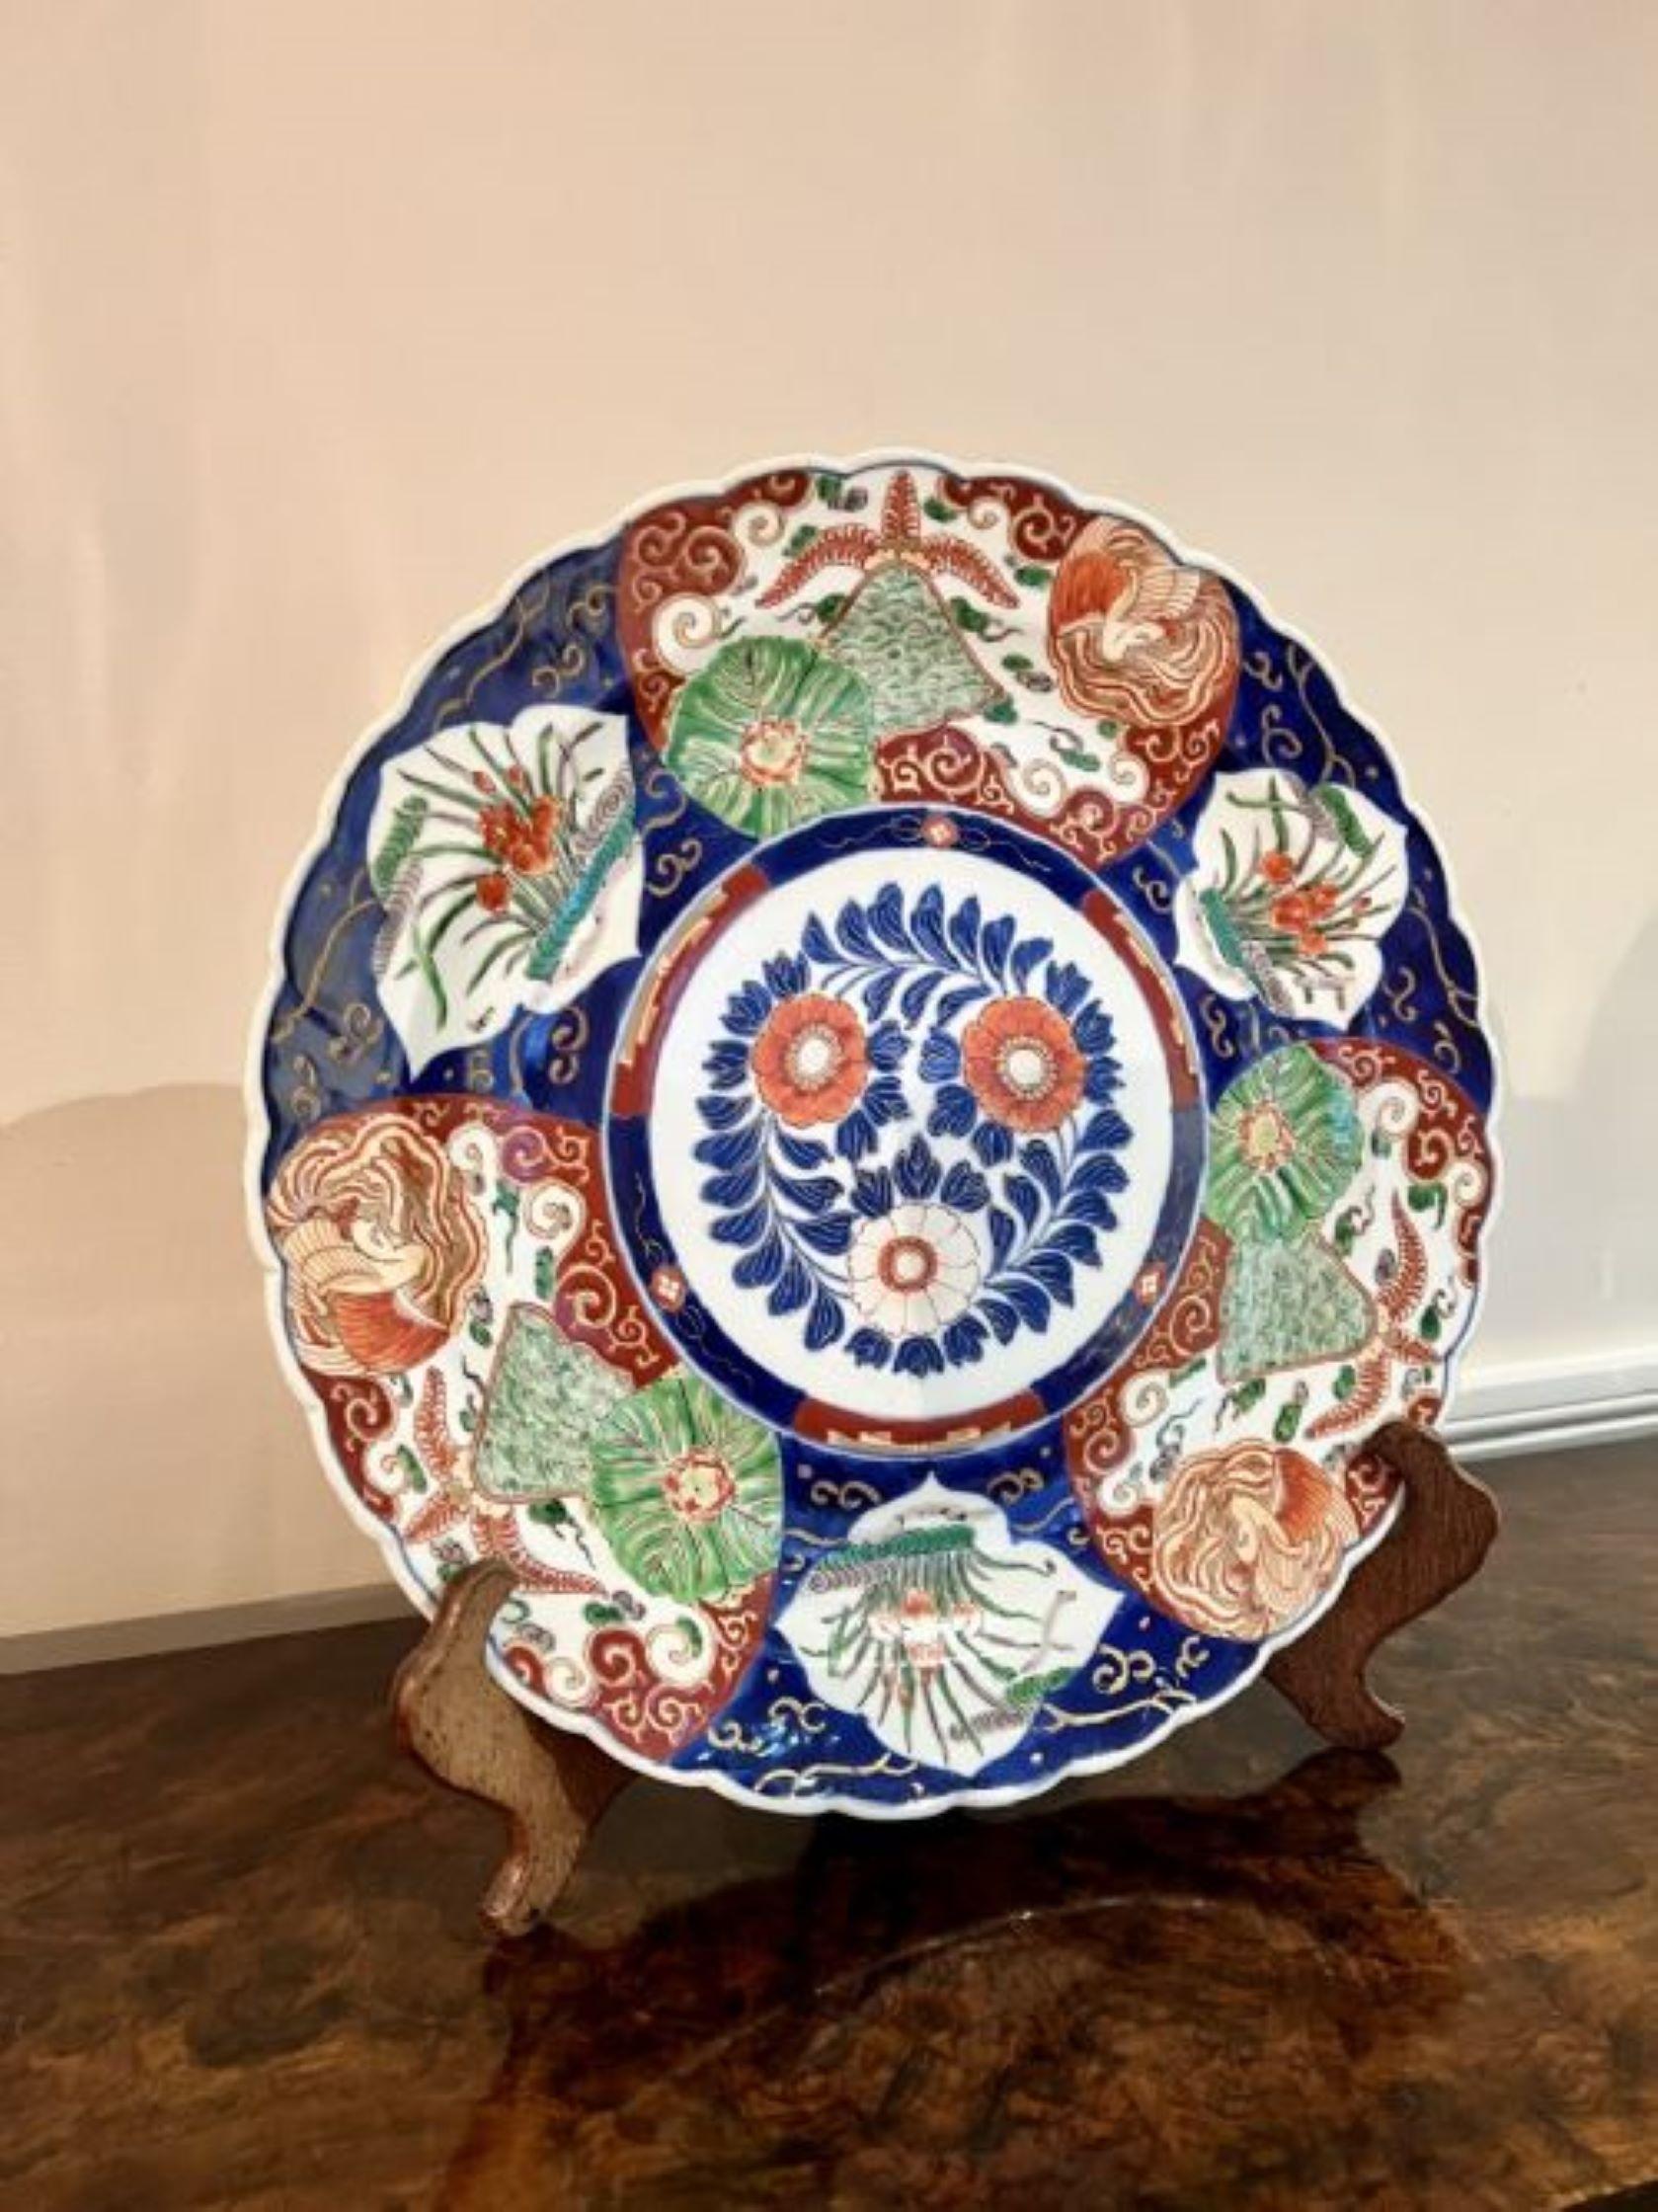 Quality antique Japanese Imari plate having a quality antique Japanese Imari charger with a wavy edge having wonderful hand painted panels with flowers and foliage in vibrant red, blue, orange, gold and white colours. 